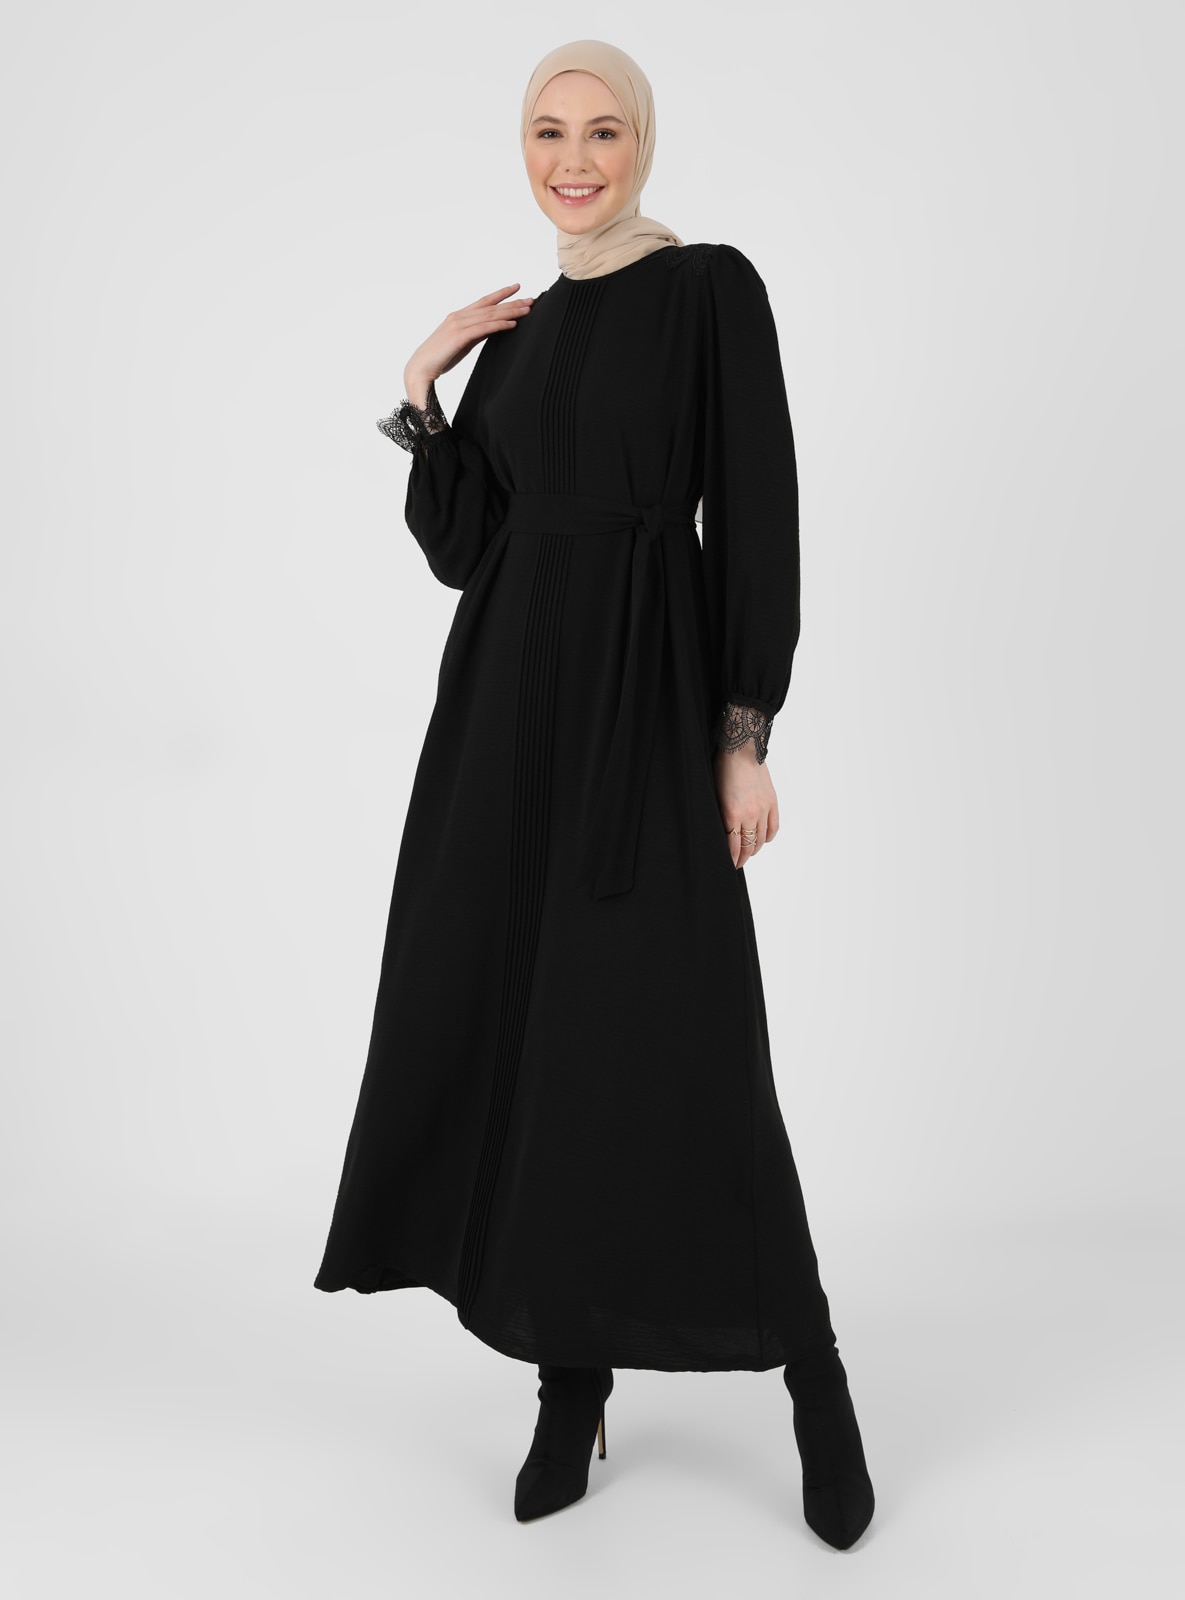 Modest Dress With Lace Collar And Sleeve Ends Black